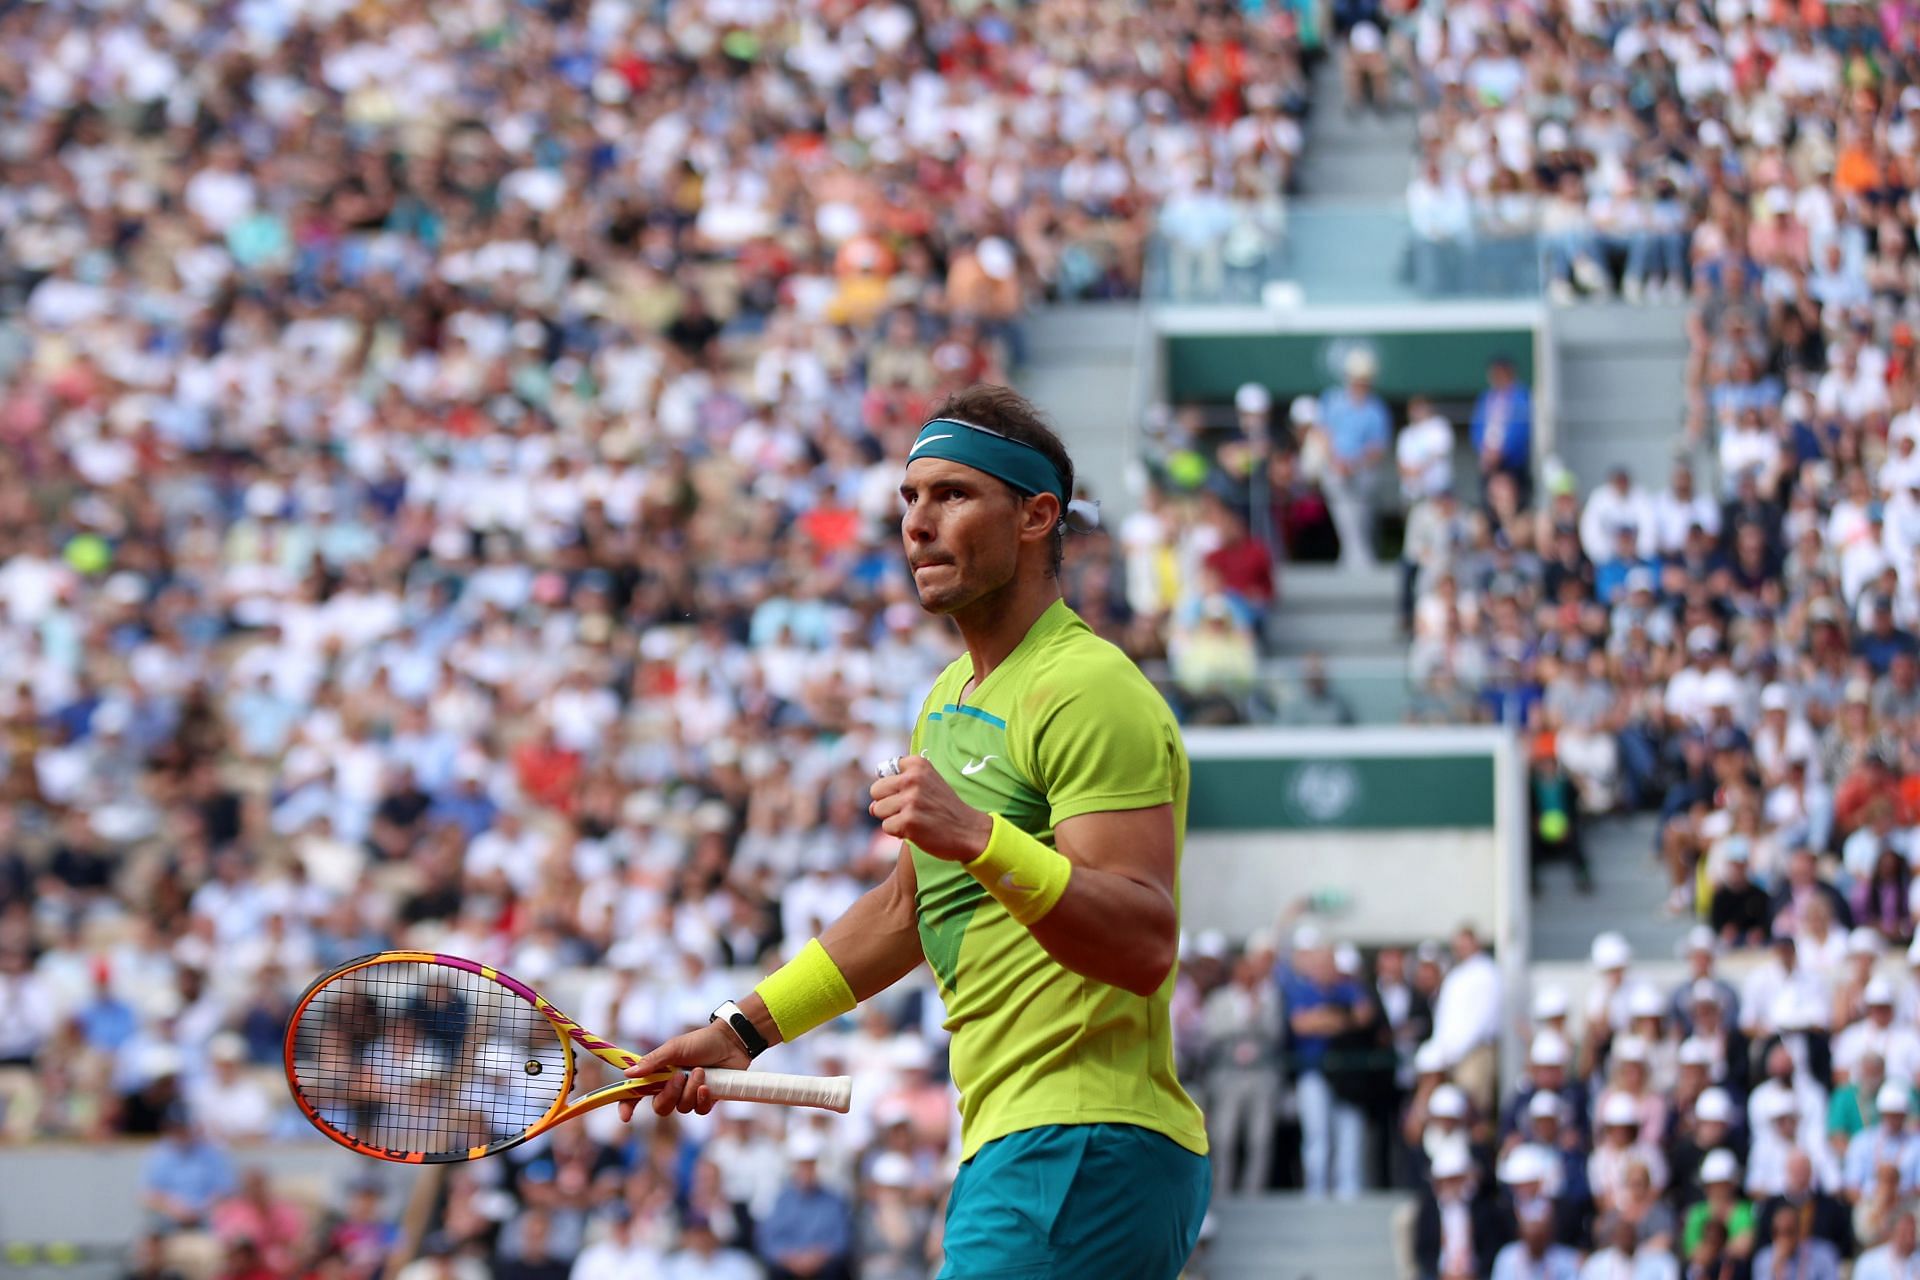 French Open 2022 Rafael Nadal vs Felix Auger-Aliassime preview, head-to-head, prediction, odds and pick Roland Garros